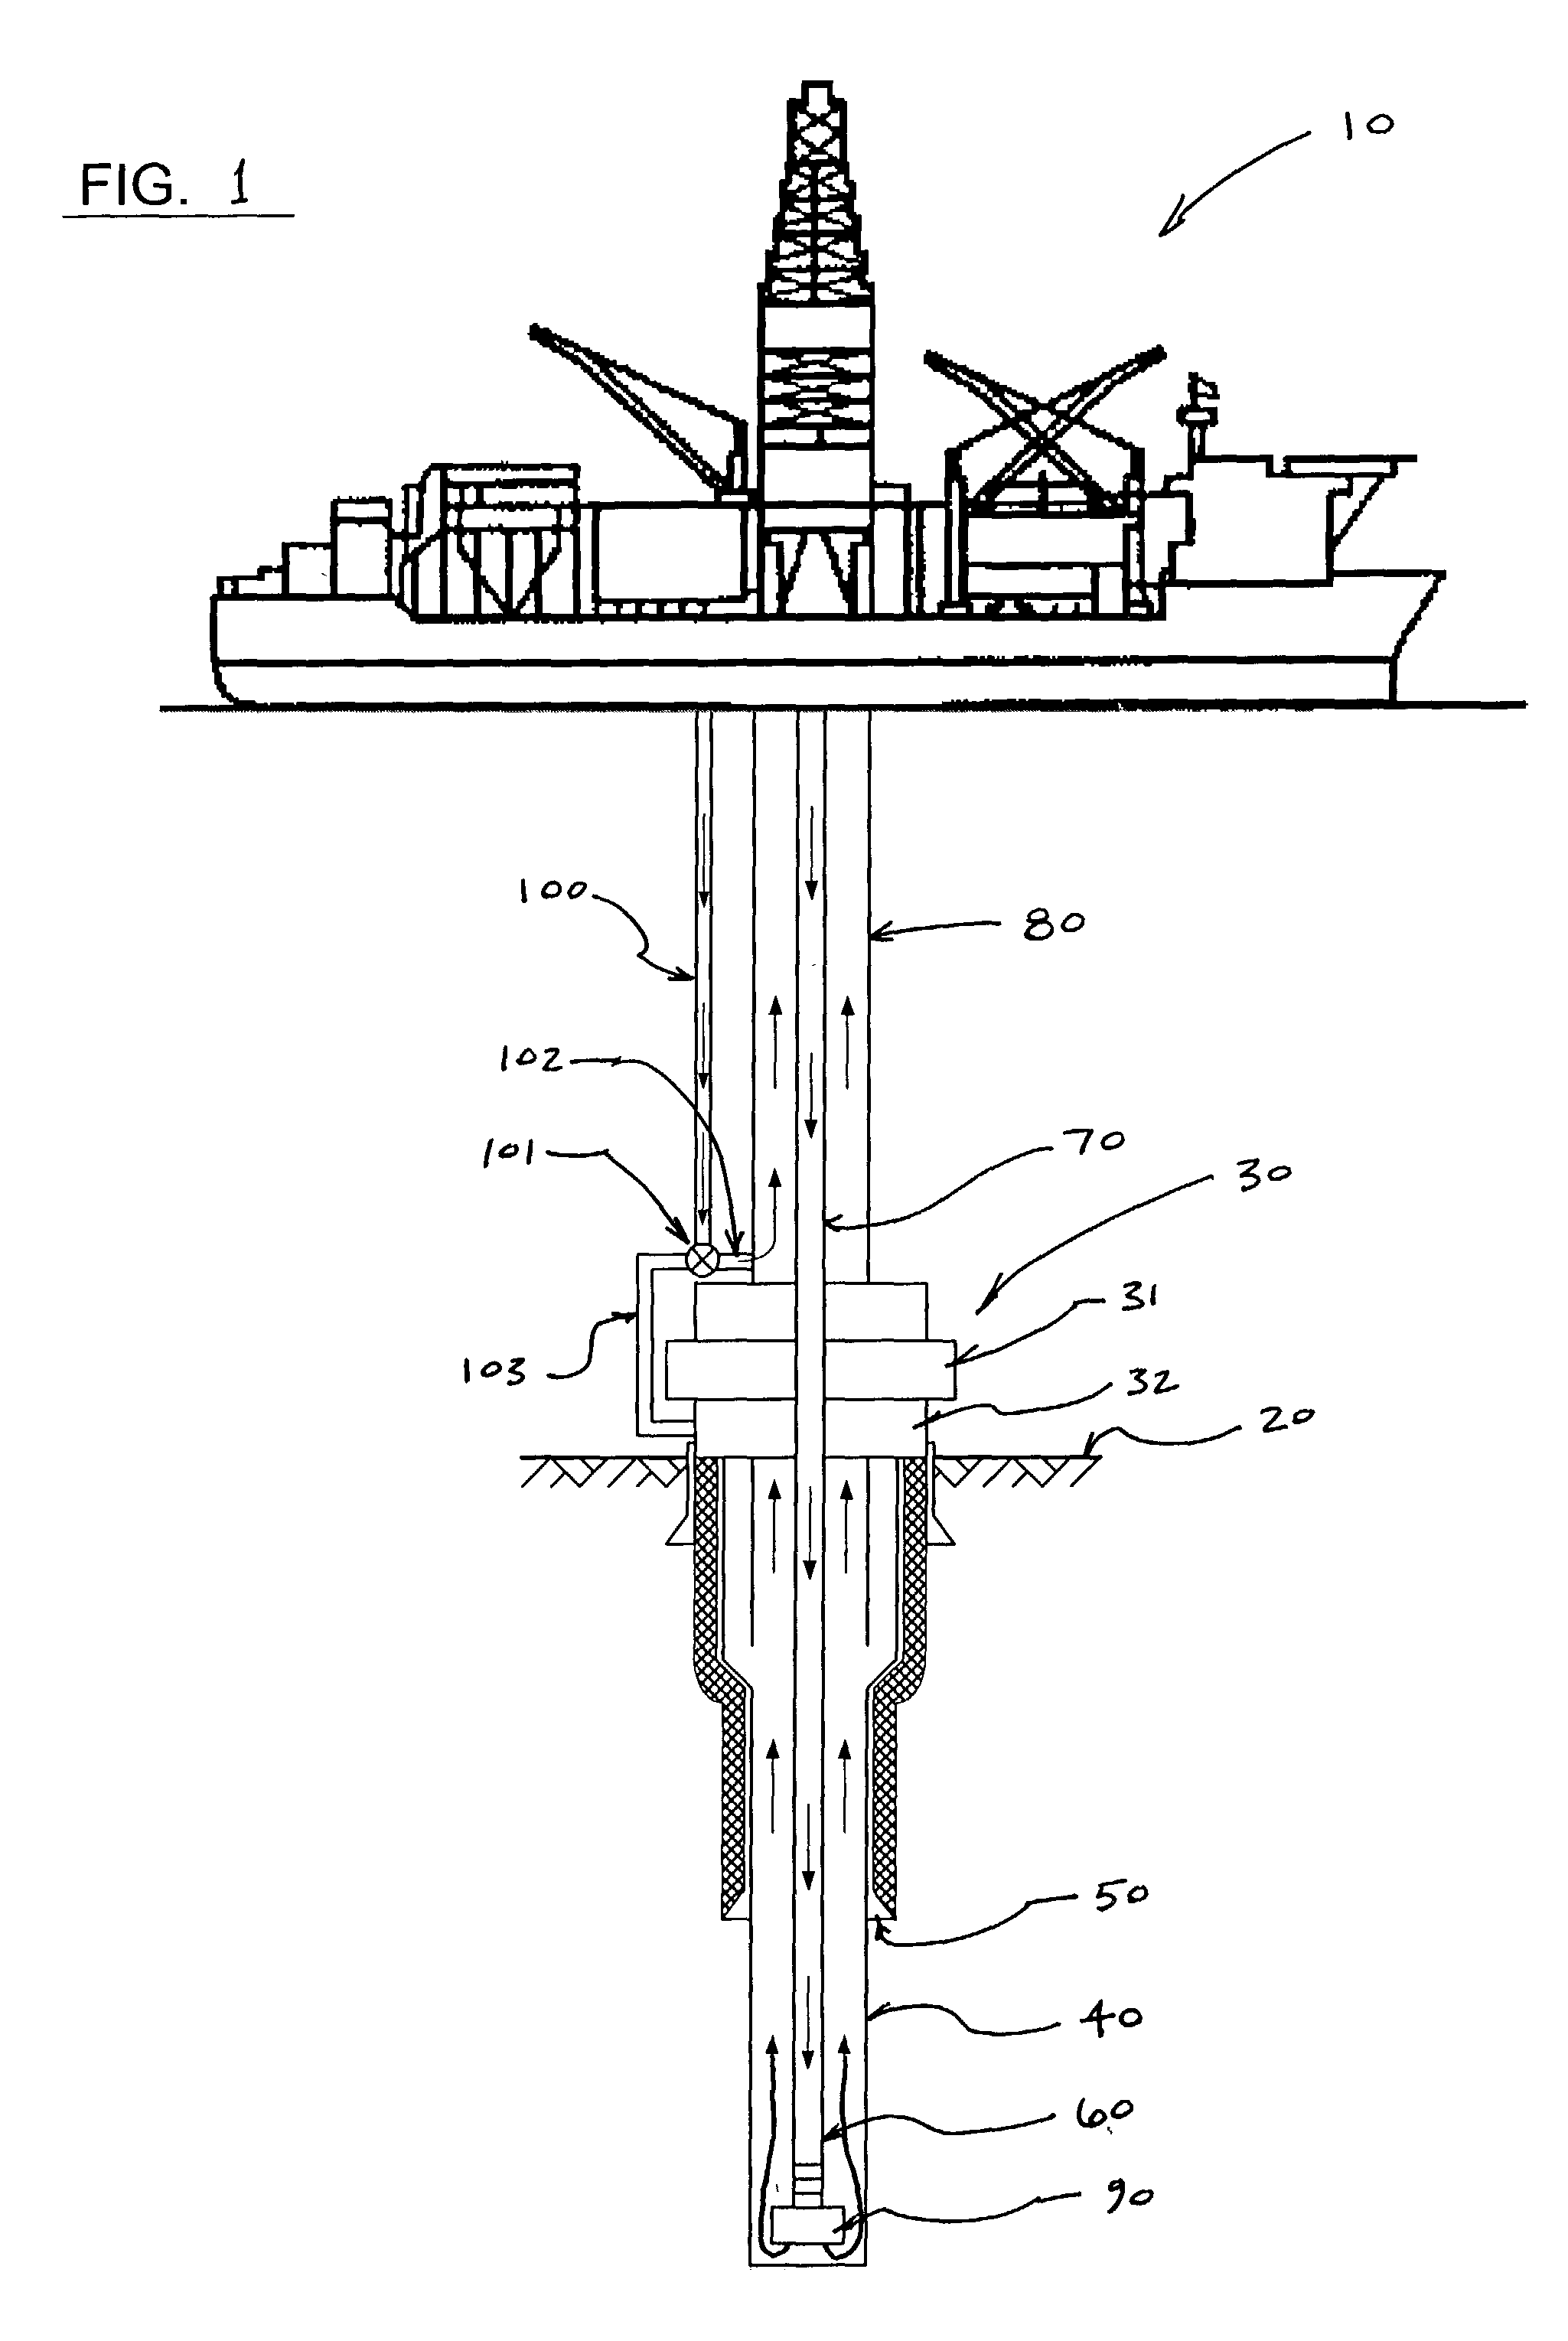 Method and apparatus for varying the density of drilling fluids in deep water oil drilling applications